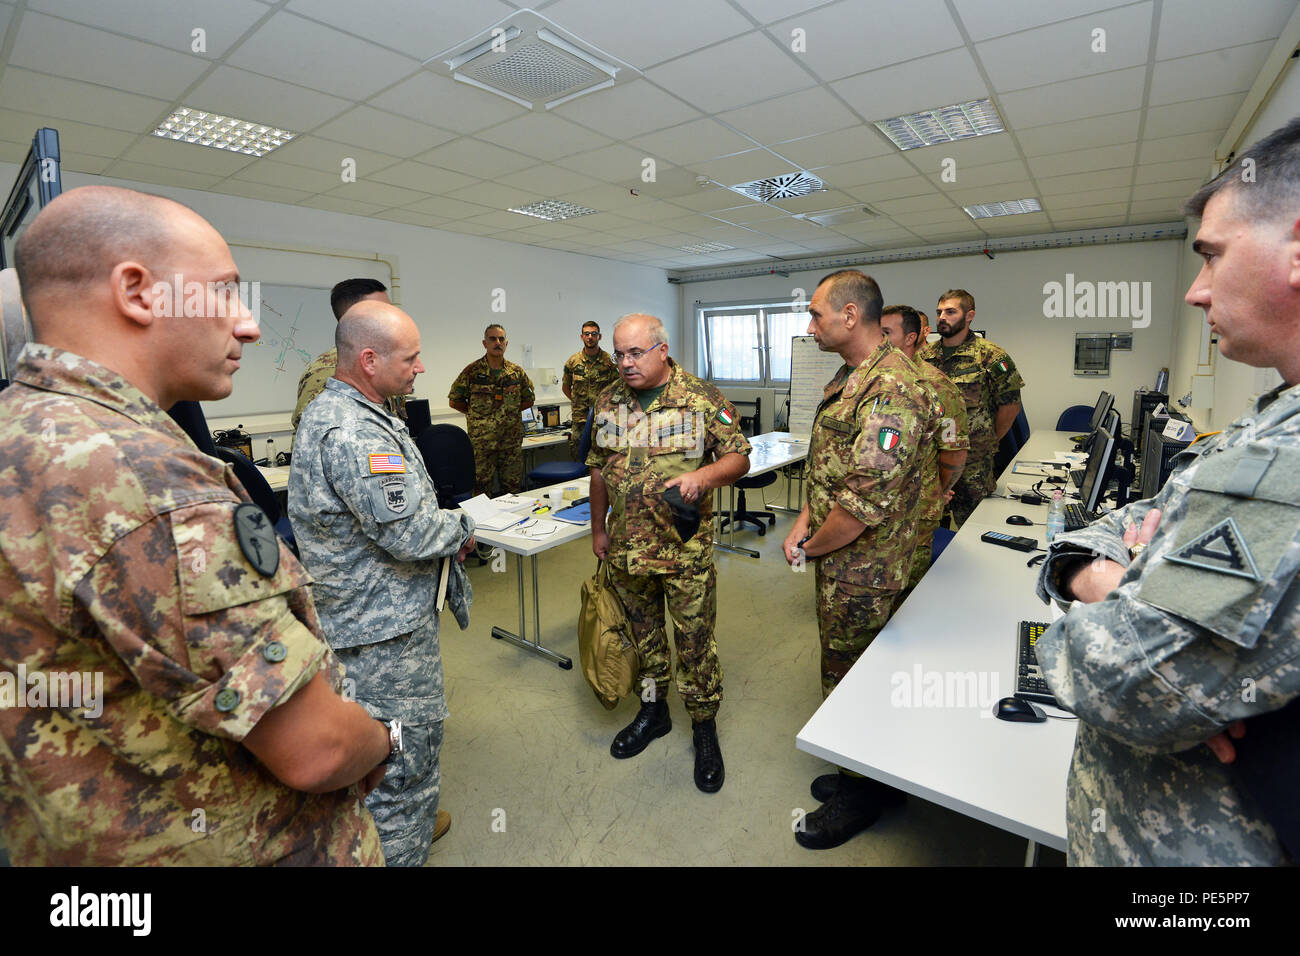 Brig. Gen. Salvatore Polimeno, commander of exercise CE.SI.VA and Brig. Gen. Christopher G. Cavoli, commander of the 7th Army Joint Multinational Training Command, talk about NIE 16.1 (Network Integration Evaluation 16.1) exercise with U.S. and Italian Soldiers at Caserma Ederle Vicenza, Italy, Sept. 28, 2015. The NIE 16.1 is a multi-nation exercise designed to increase interoperability and communication between U.S. and NATO Friendly Force. (U.S. Army photo by Visual Information Specialist Paolo Bovo/released) Stock Photo